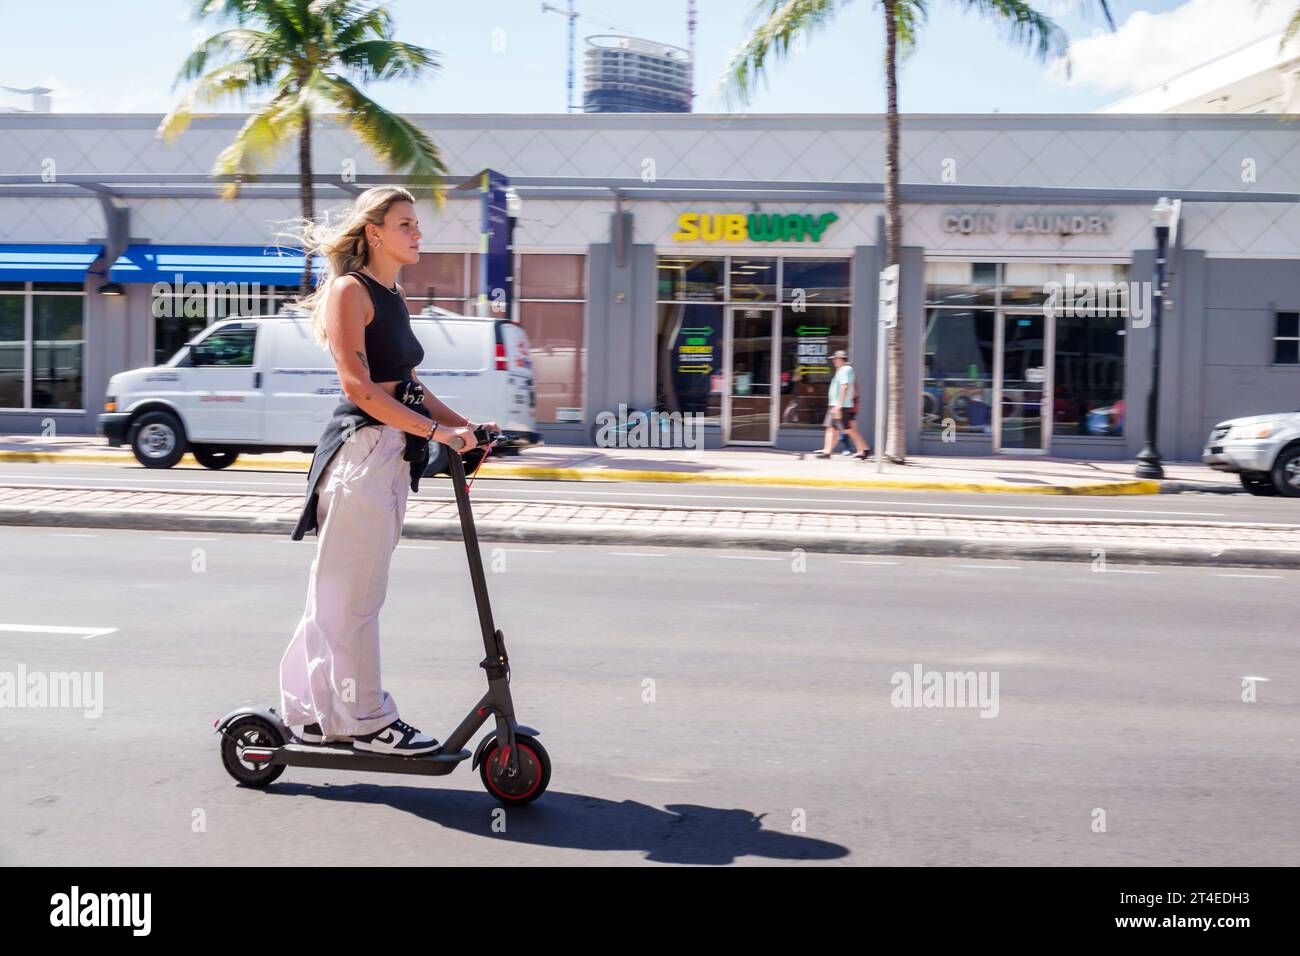 Miami Beach Florida,riding driving electric scooter street,woman women lady female,adult,resident Stock Photo